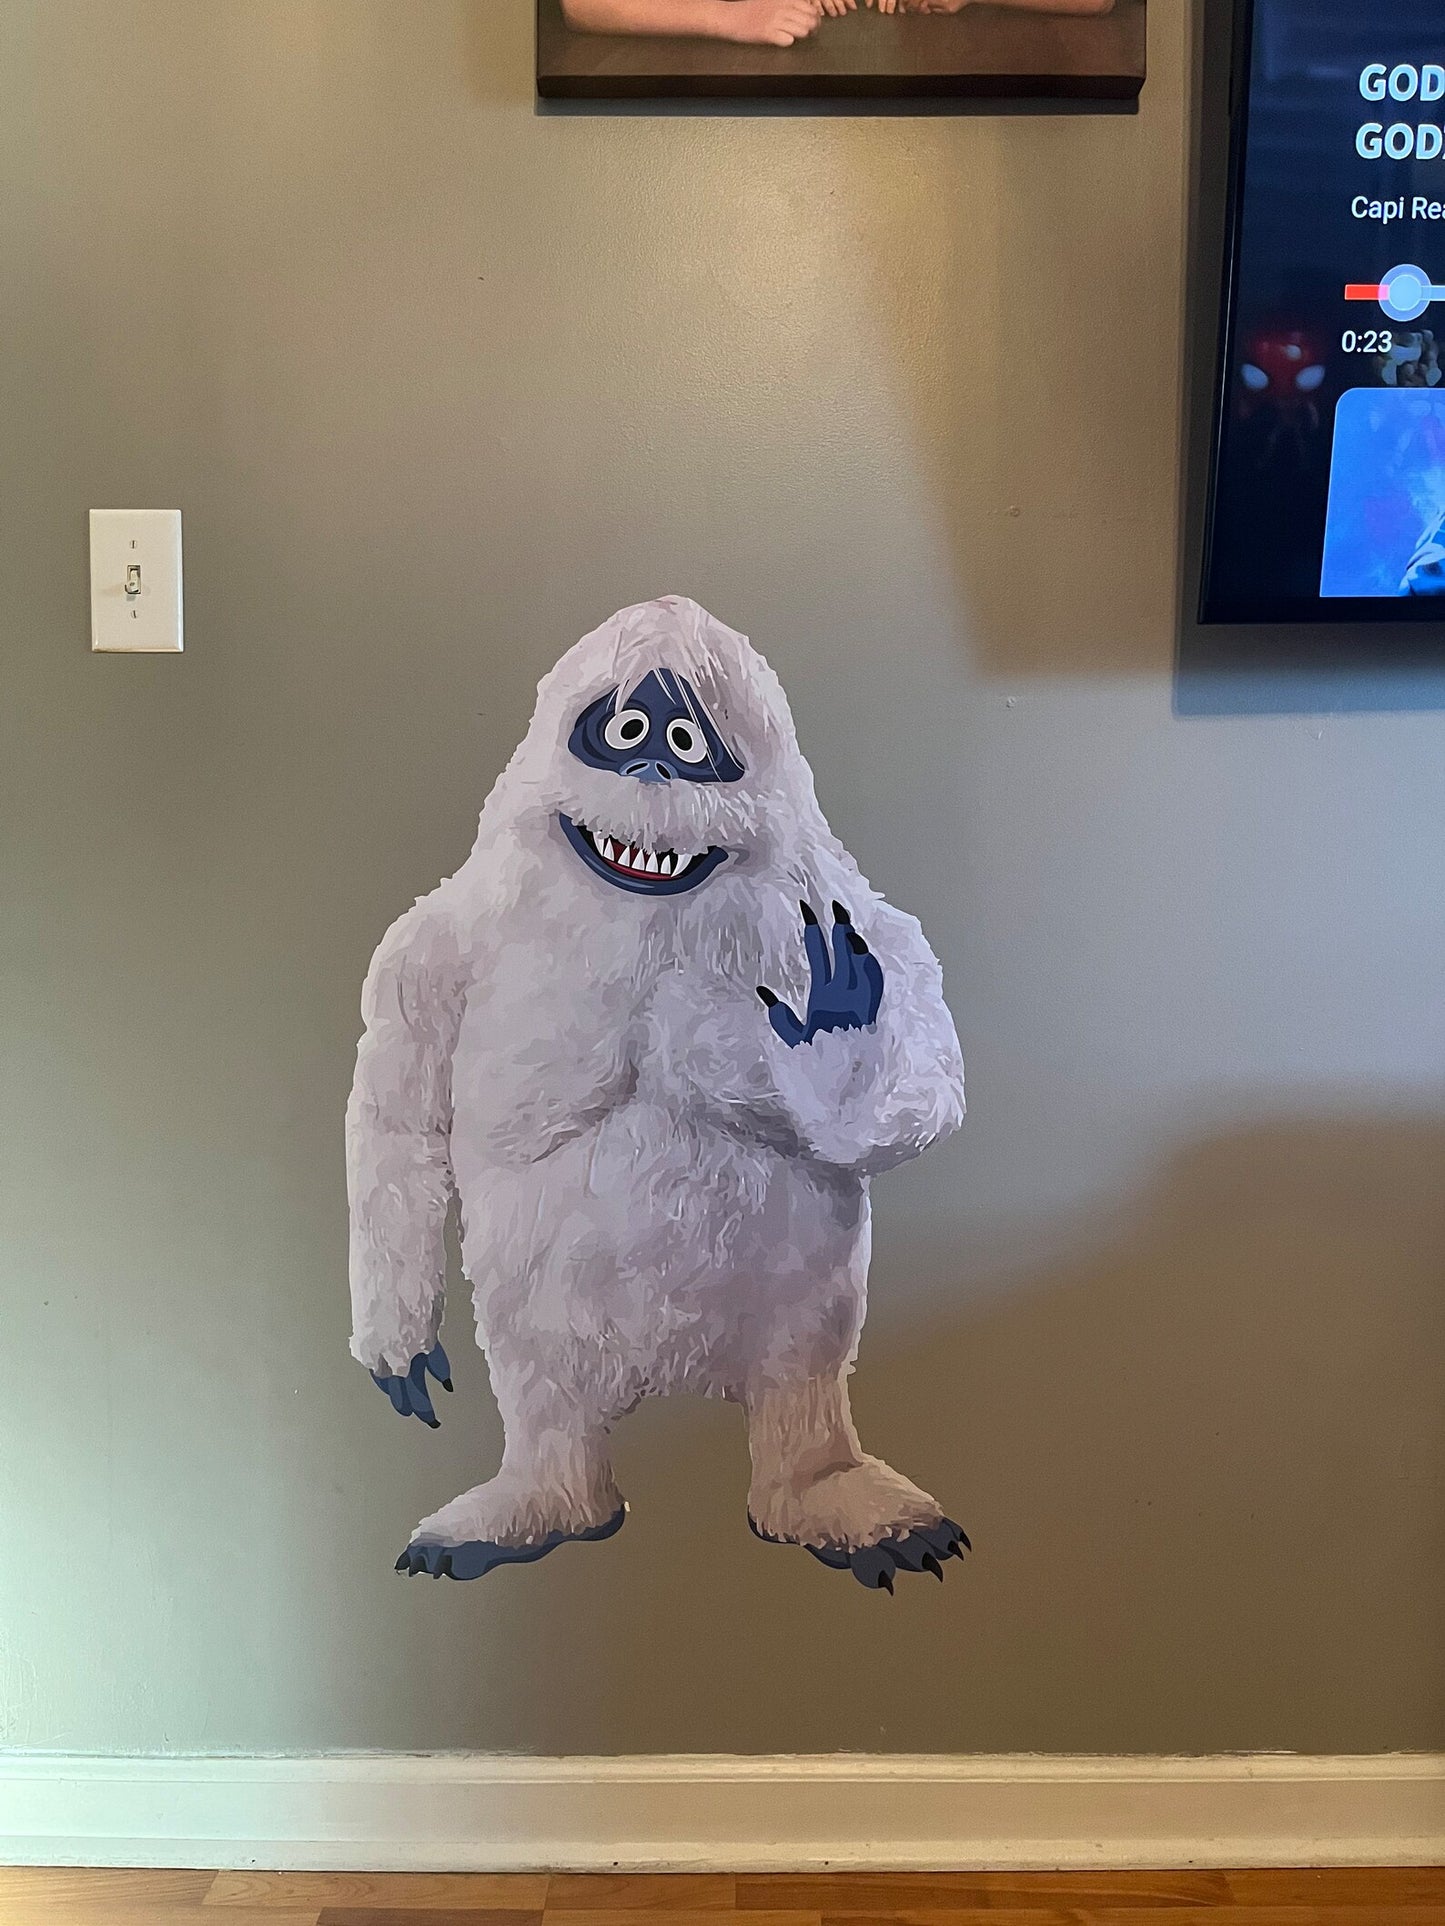 Yeti wall cling Almost 3ft tall. Christmas Movie Decorations. Easily remove and replace